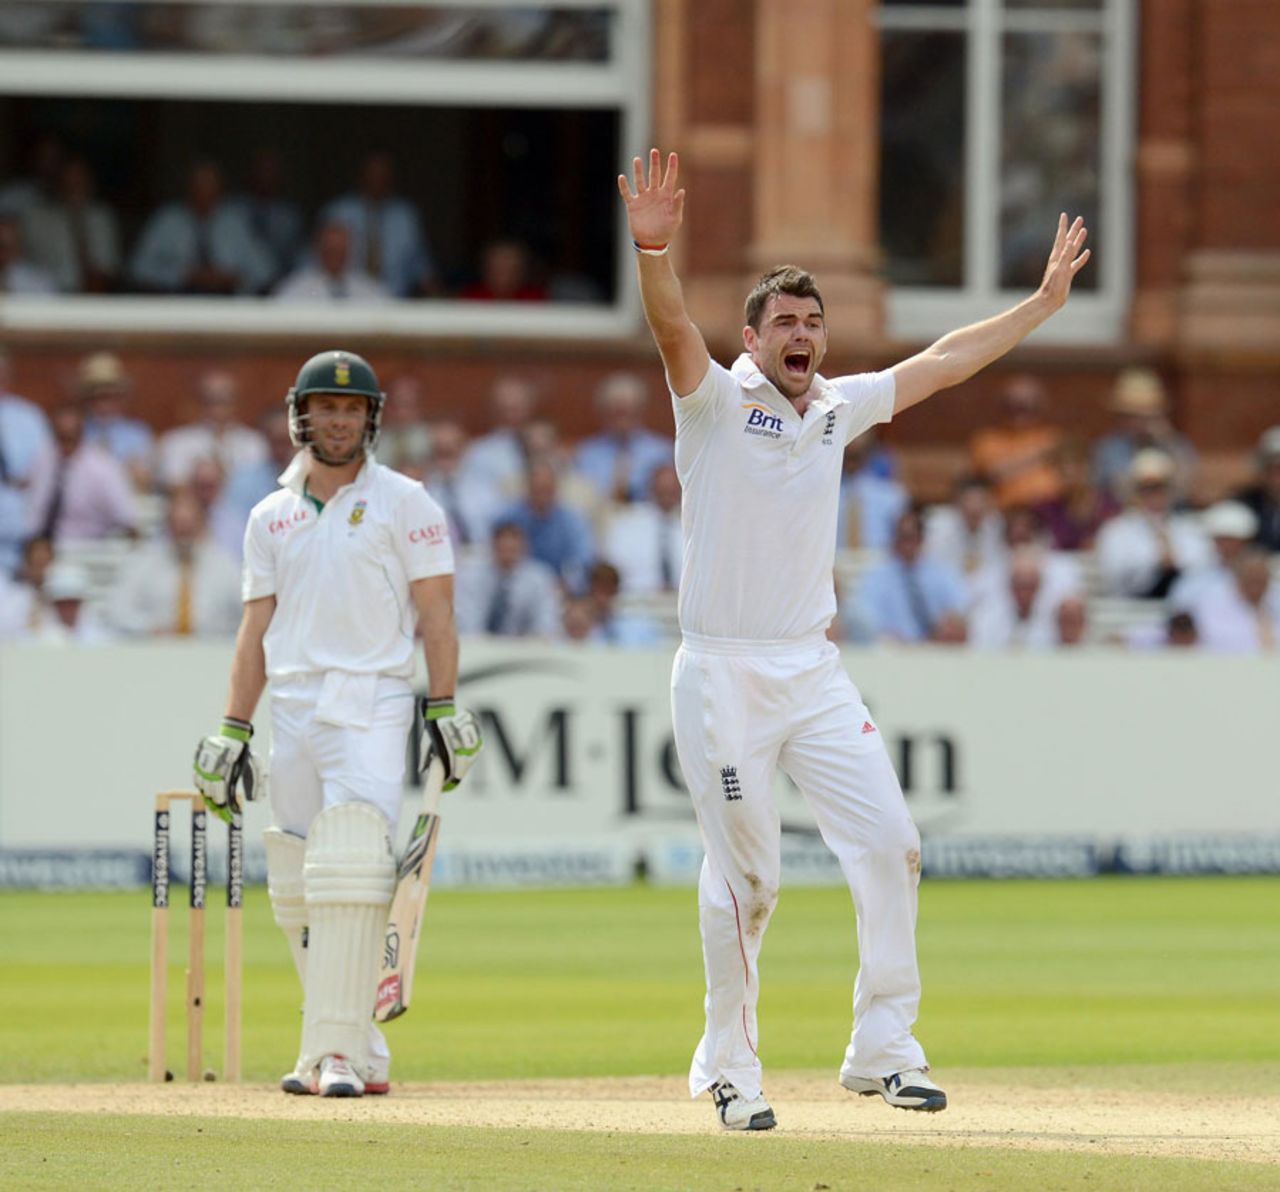 James Anderson appeals for lbw against AB de Villiers, England v South Africa, 3rd Investec Test, Lord's, 4th day, August 19, 2012